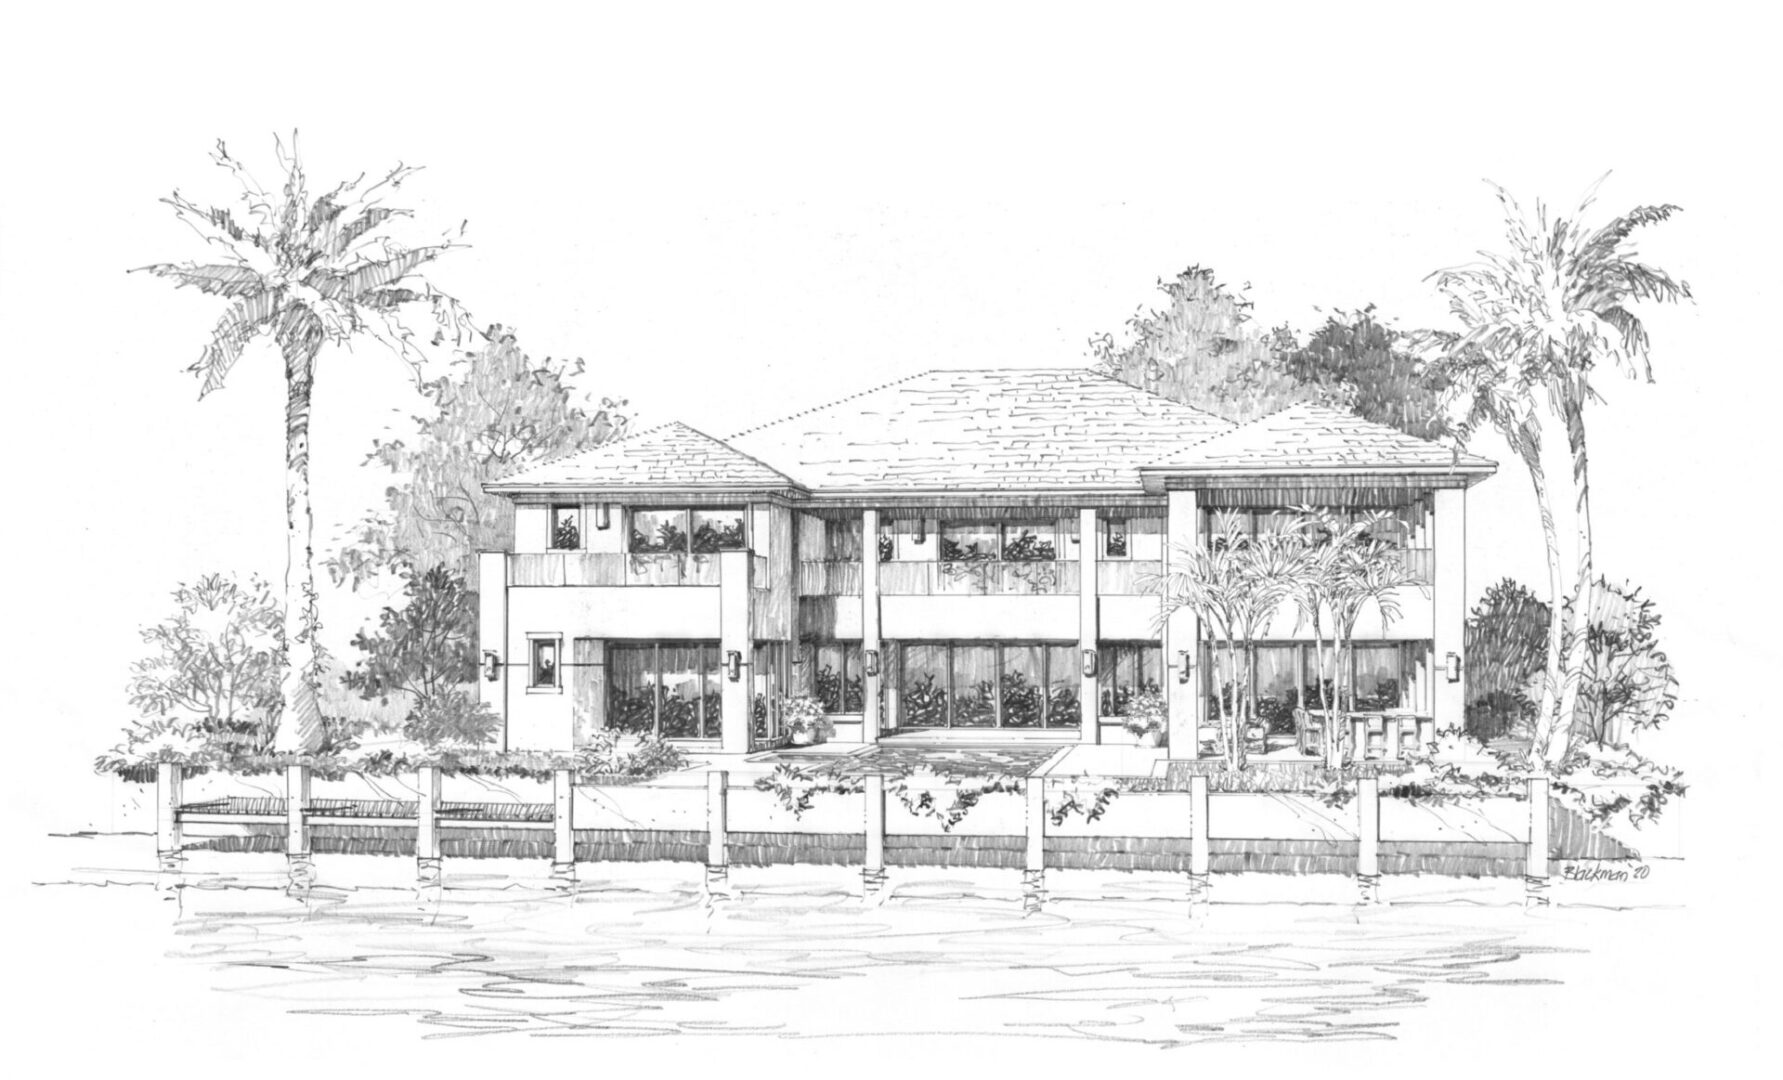 A drawing of a house with trees in the background